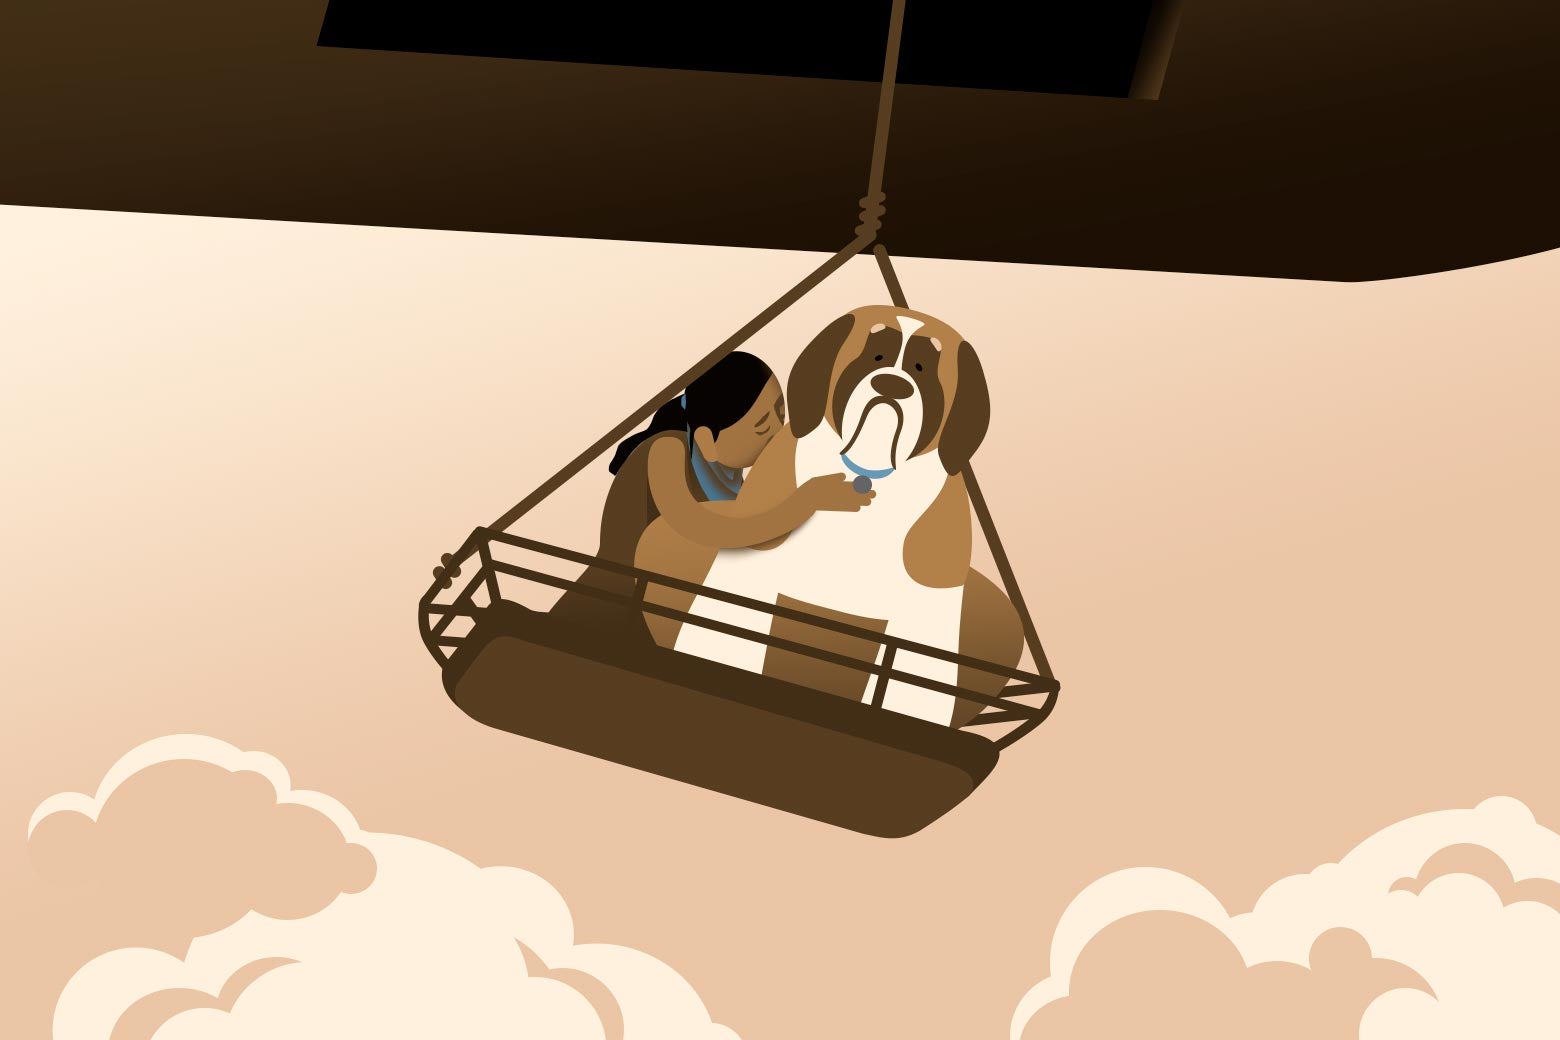 Illustration of a girl and a dog being rescued via helicopter, with the girl hugging the dog